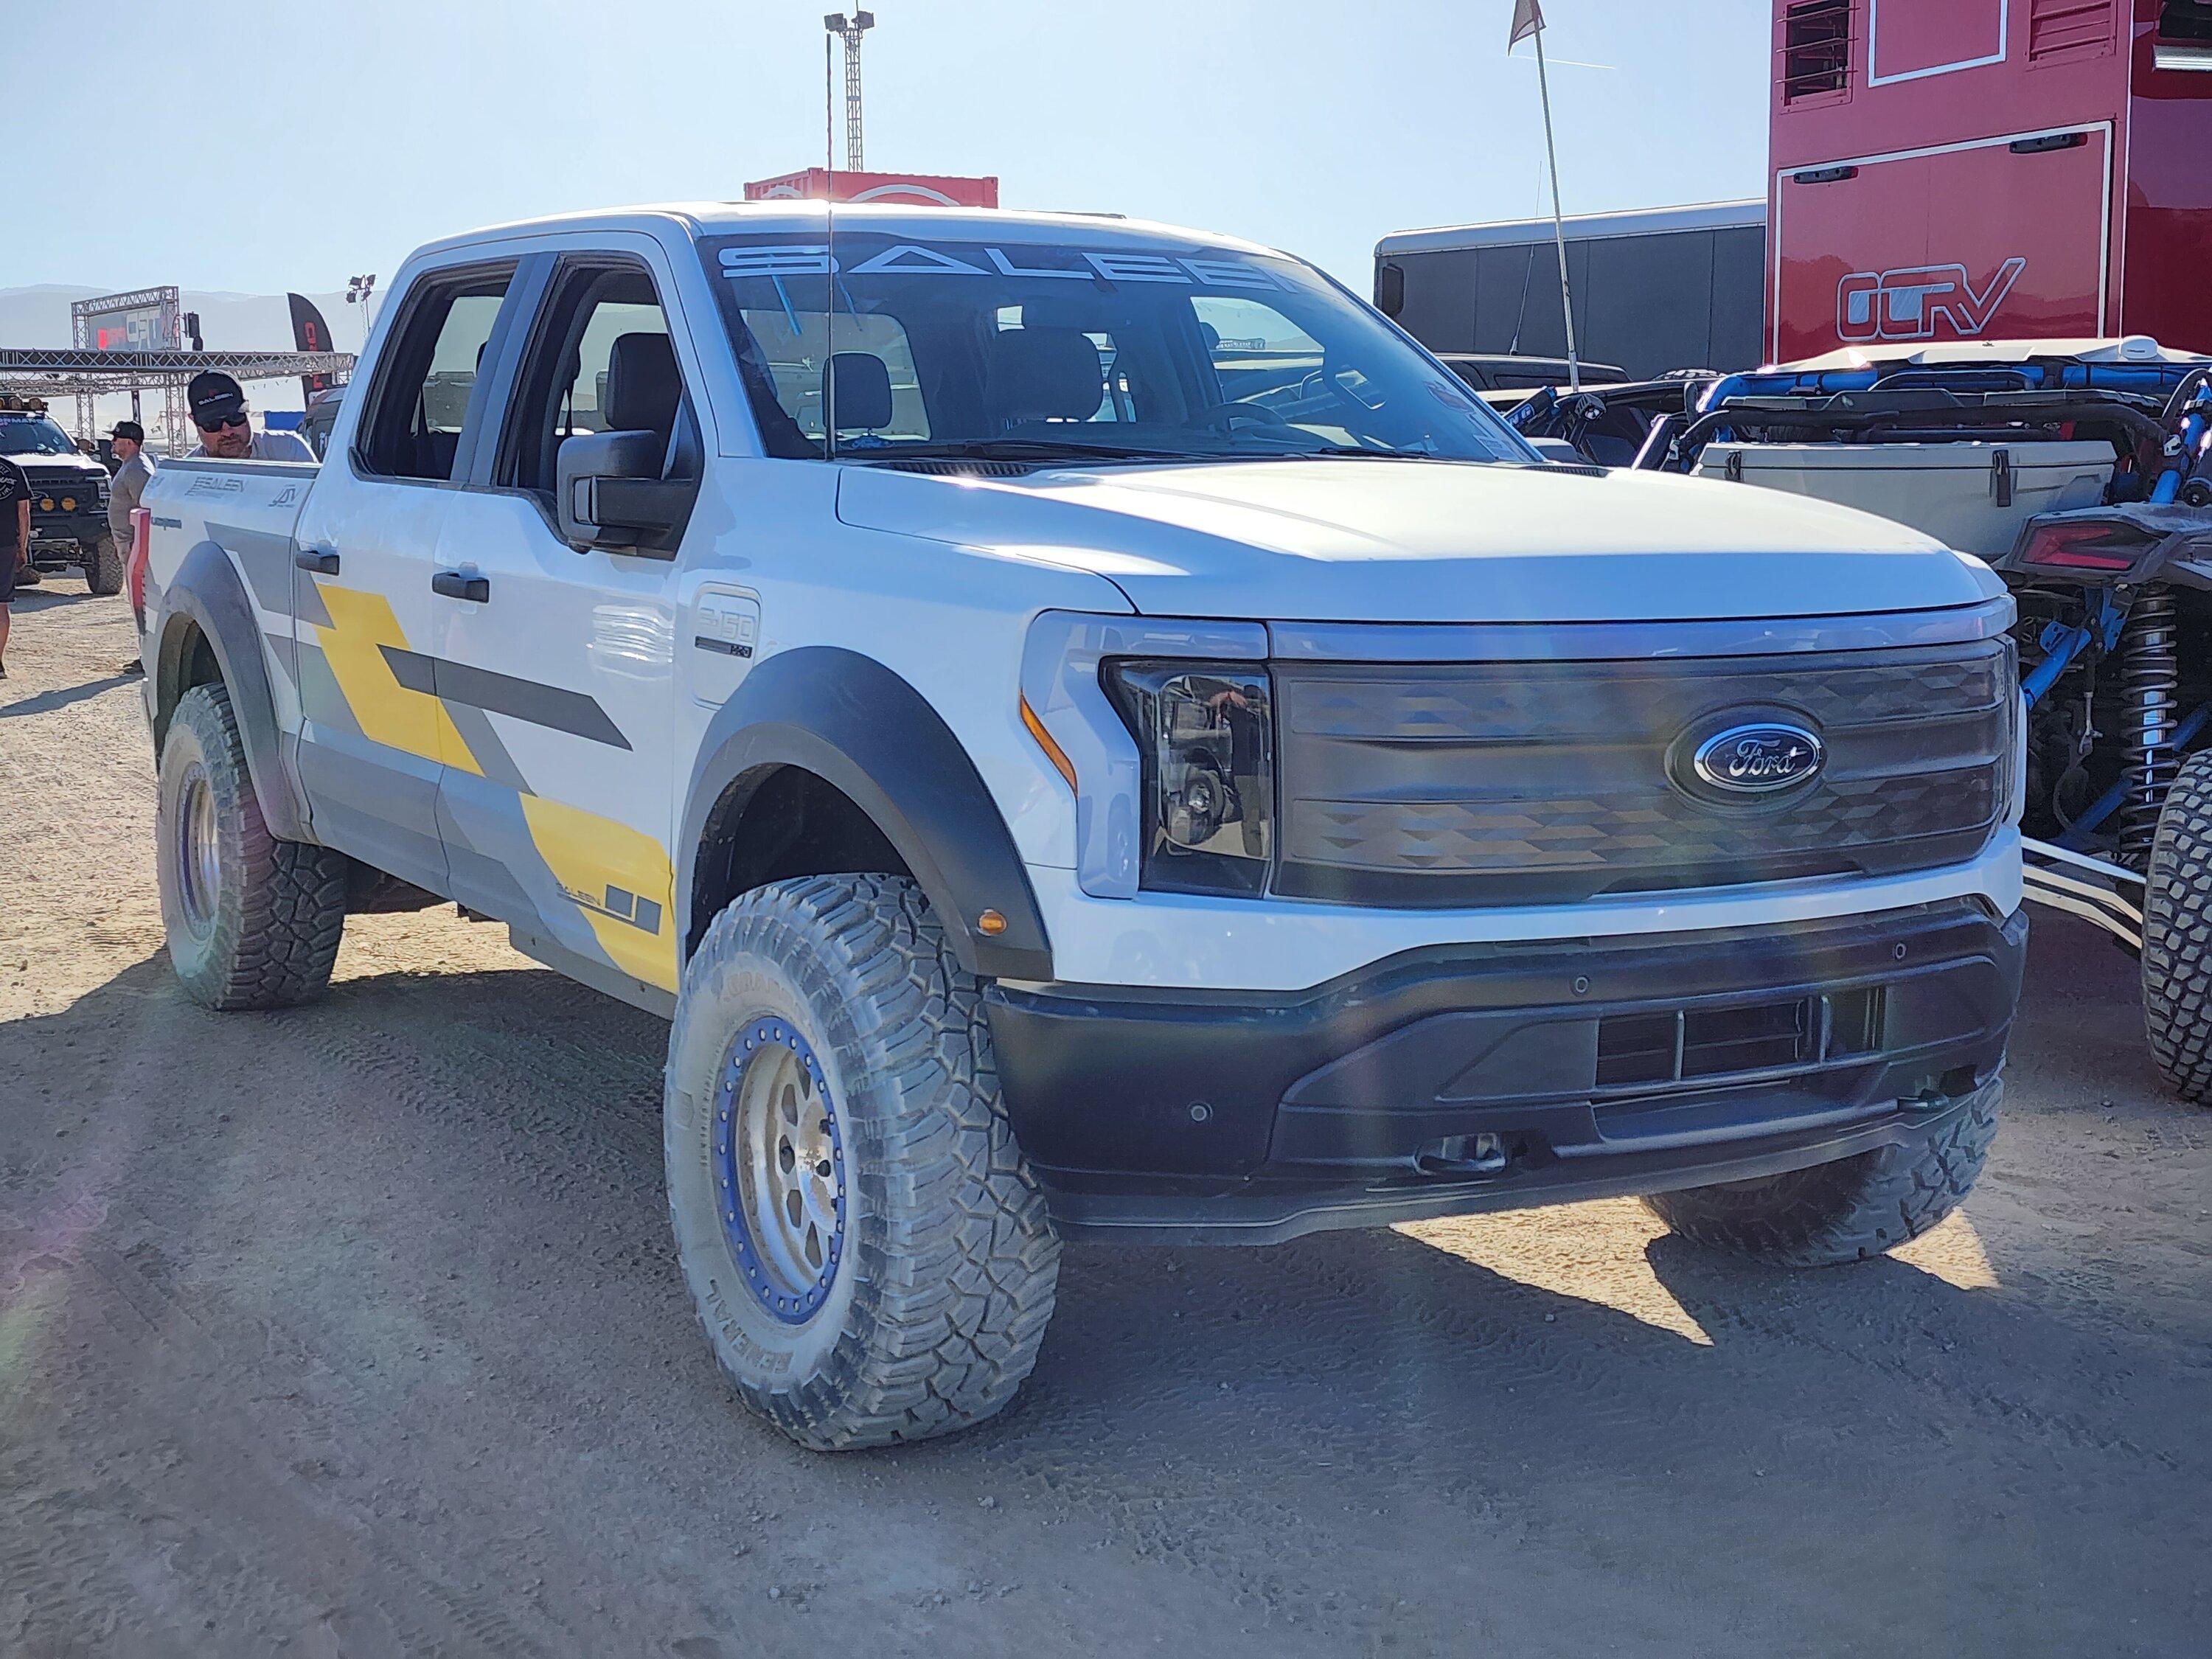 Ford F-150 Lightning Saleen F150 Lightning first look w/ Raptor front suspension & fenders + custom rear suspension and offroad tires 20230208_151018-